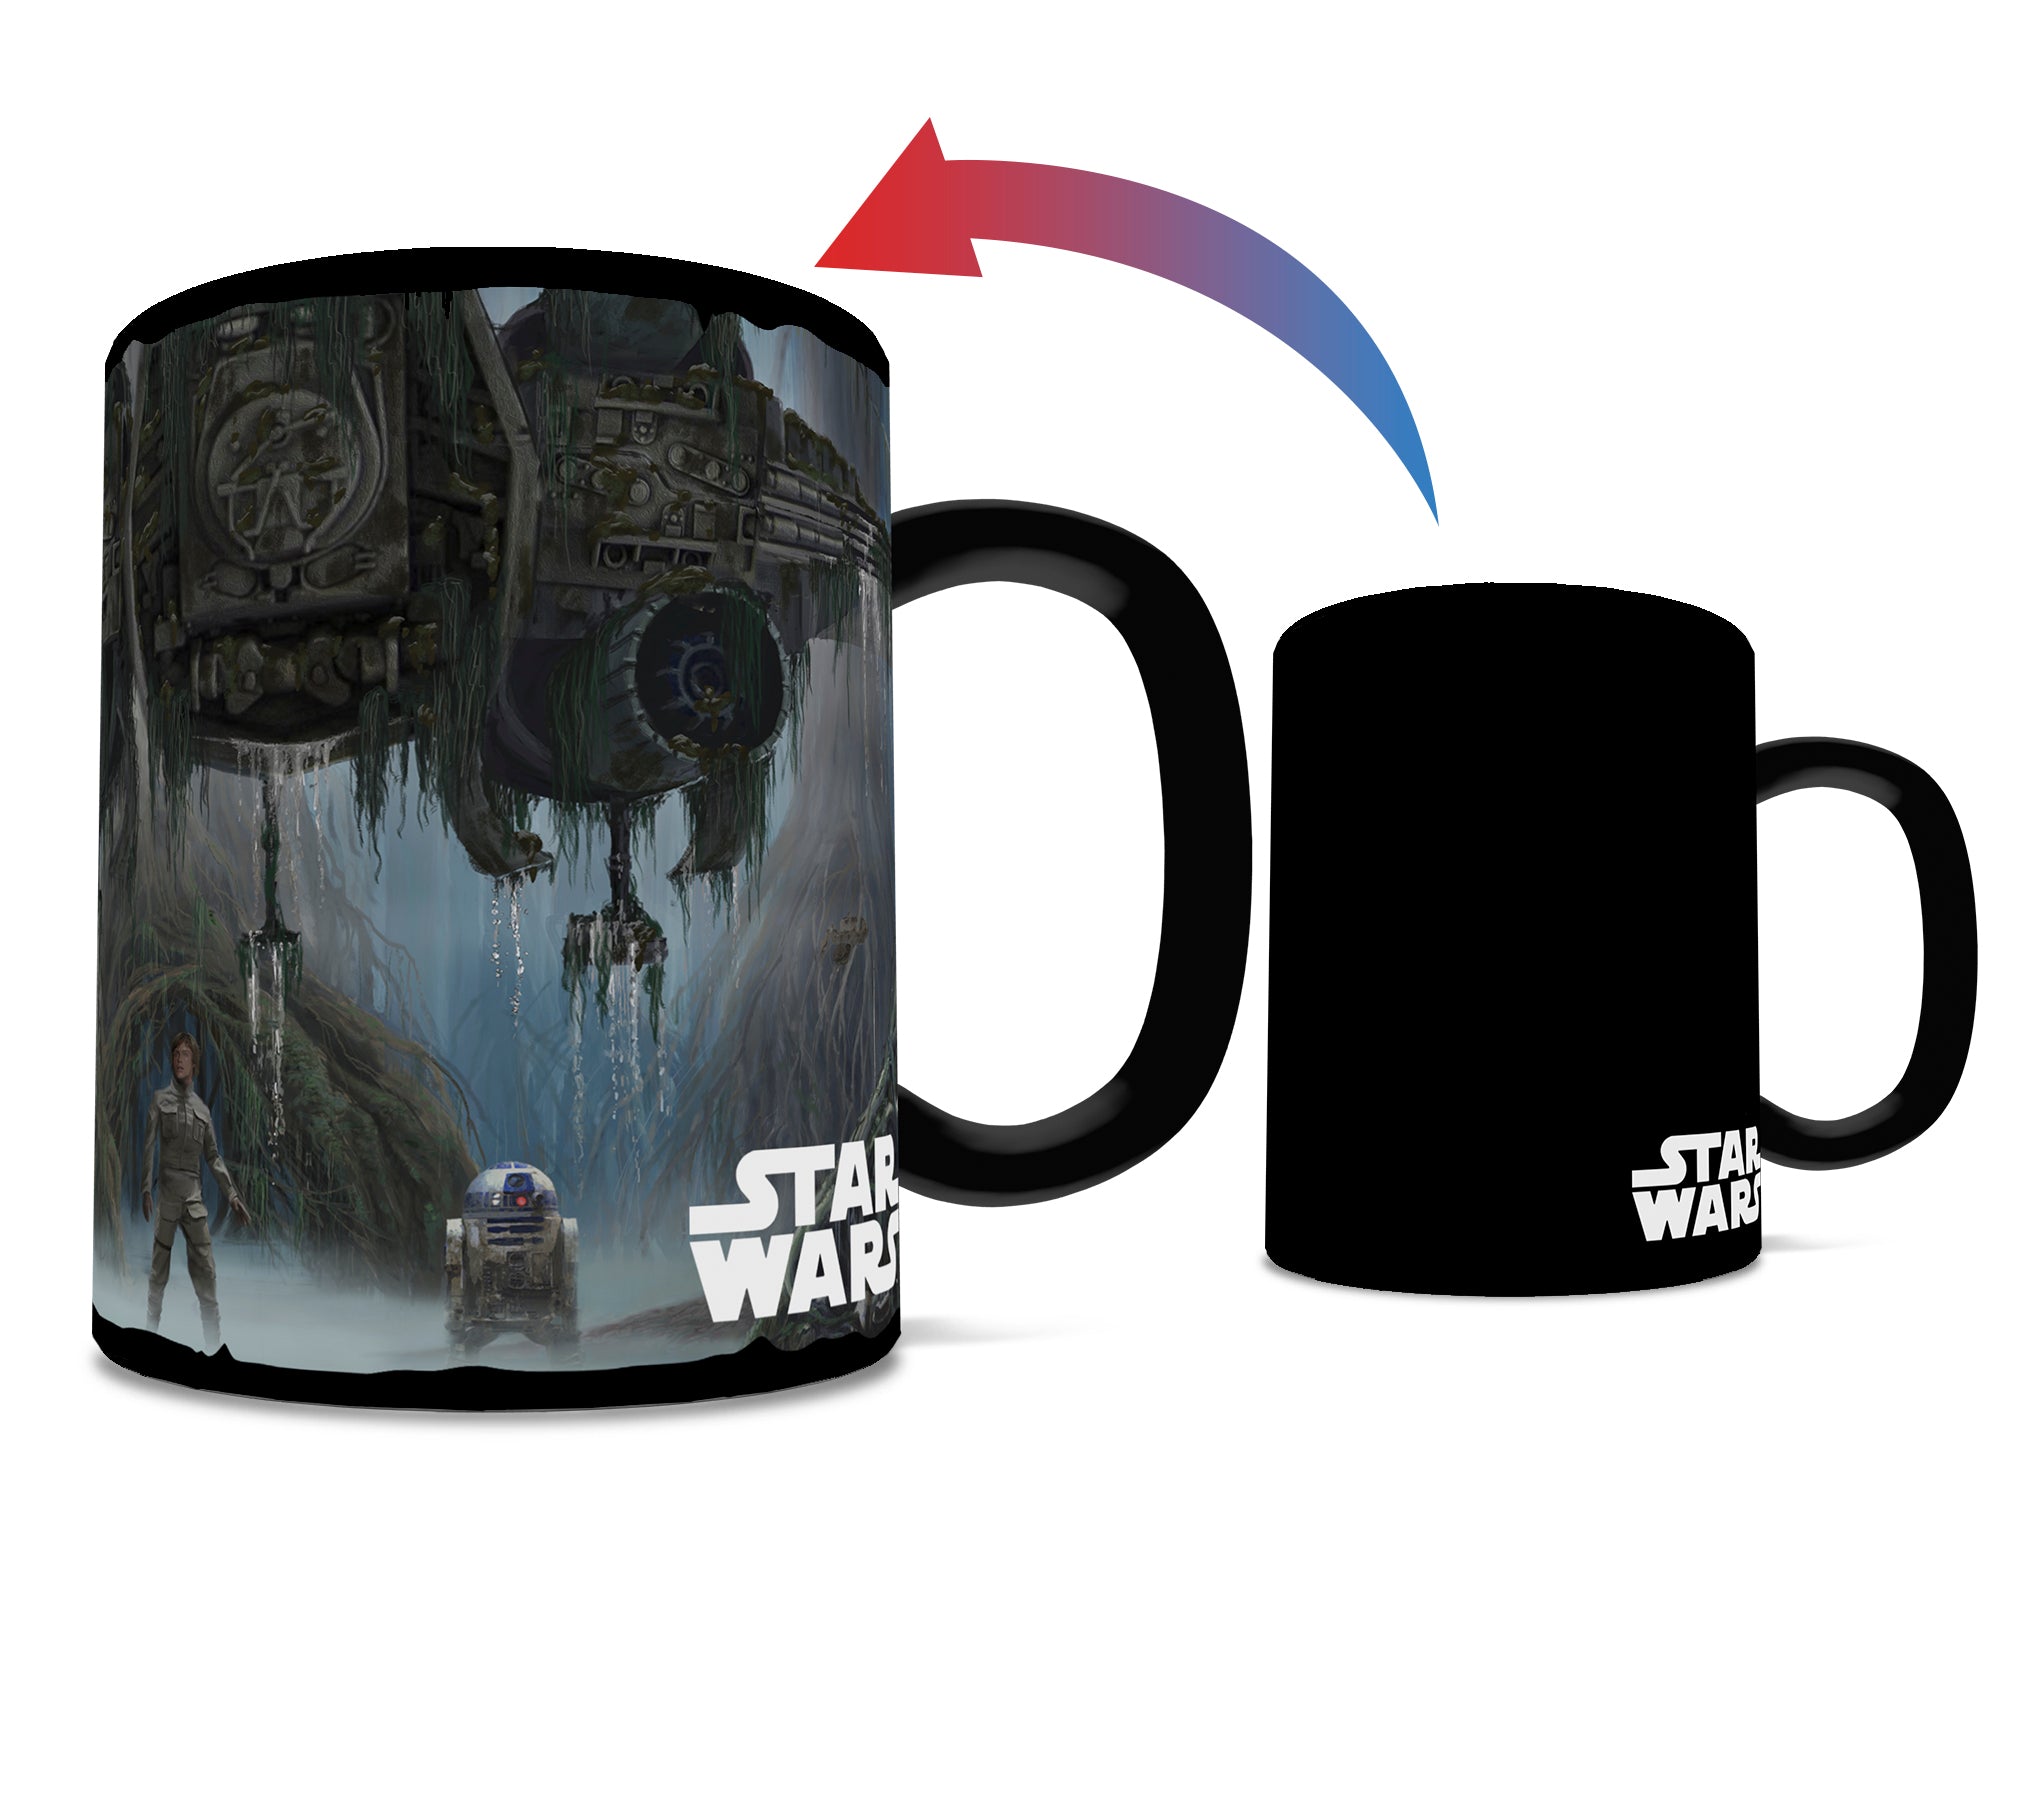 Star Wars (Do. Or Do Not. There Is No Try) Morphing Mugs® Heat-Sensitive Clue Mug MMUGC1299